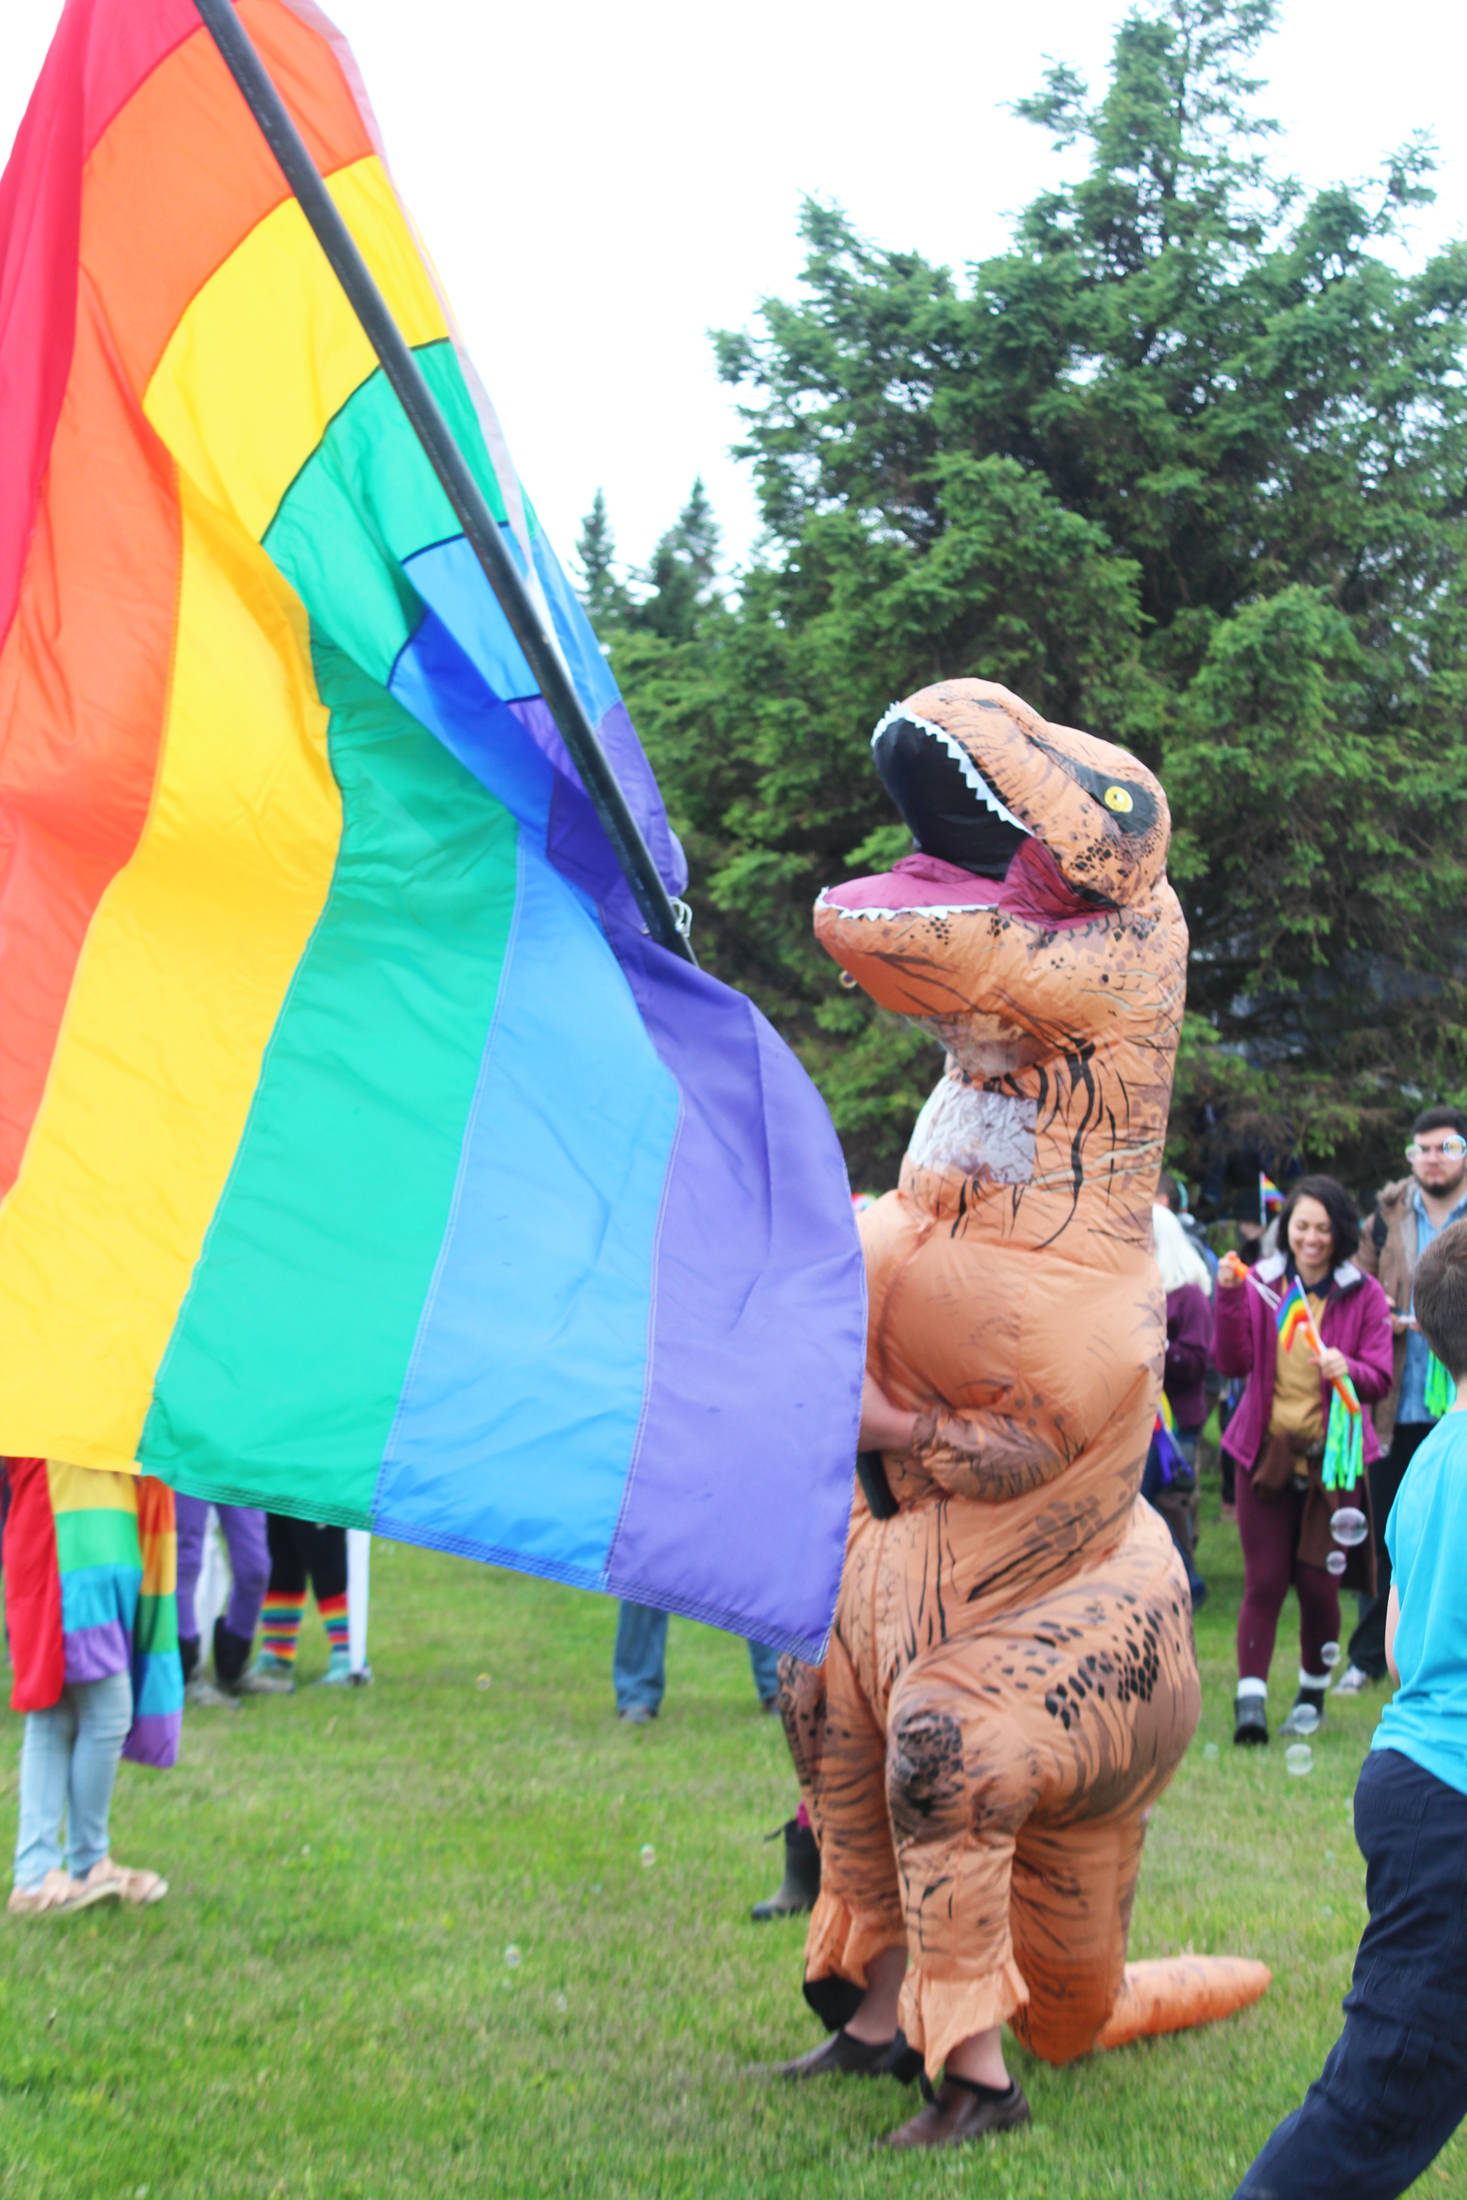 Gage Dillon, 14, waves a pride flag while dressed in a dinosaur suit before Homer’s first ever Pride March on Saturday, June 23, 2018 at WKFL Park in Homer, Alaska. (Photo by Megan Pacer/Homer News)